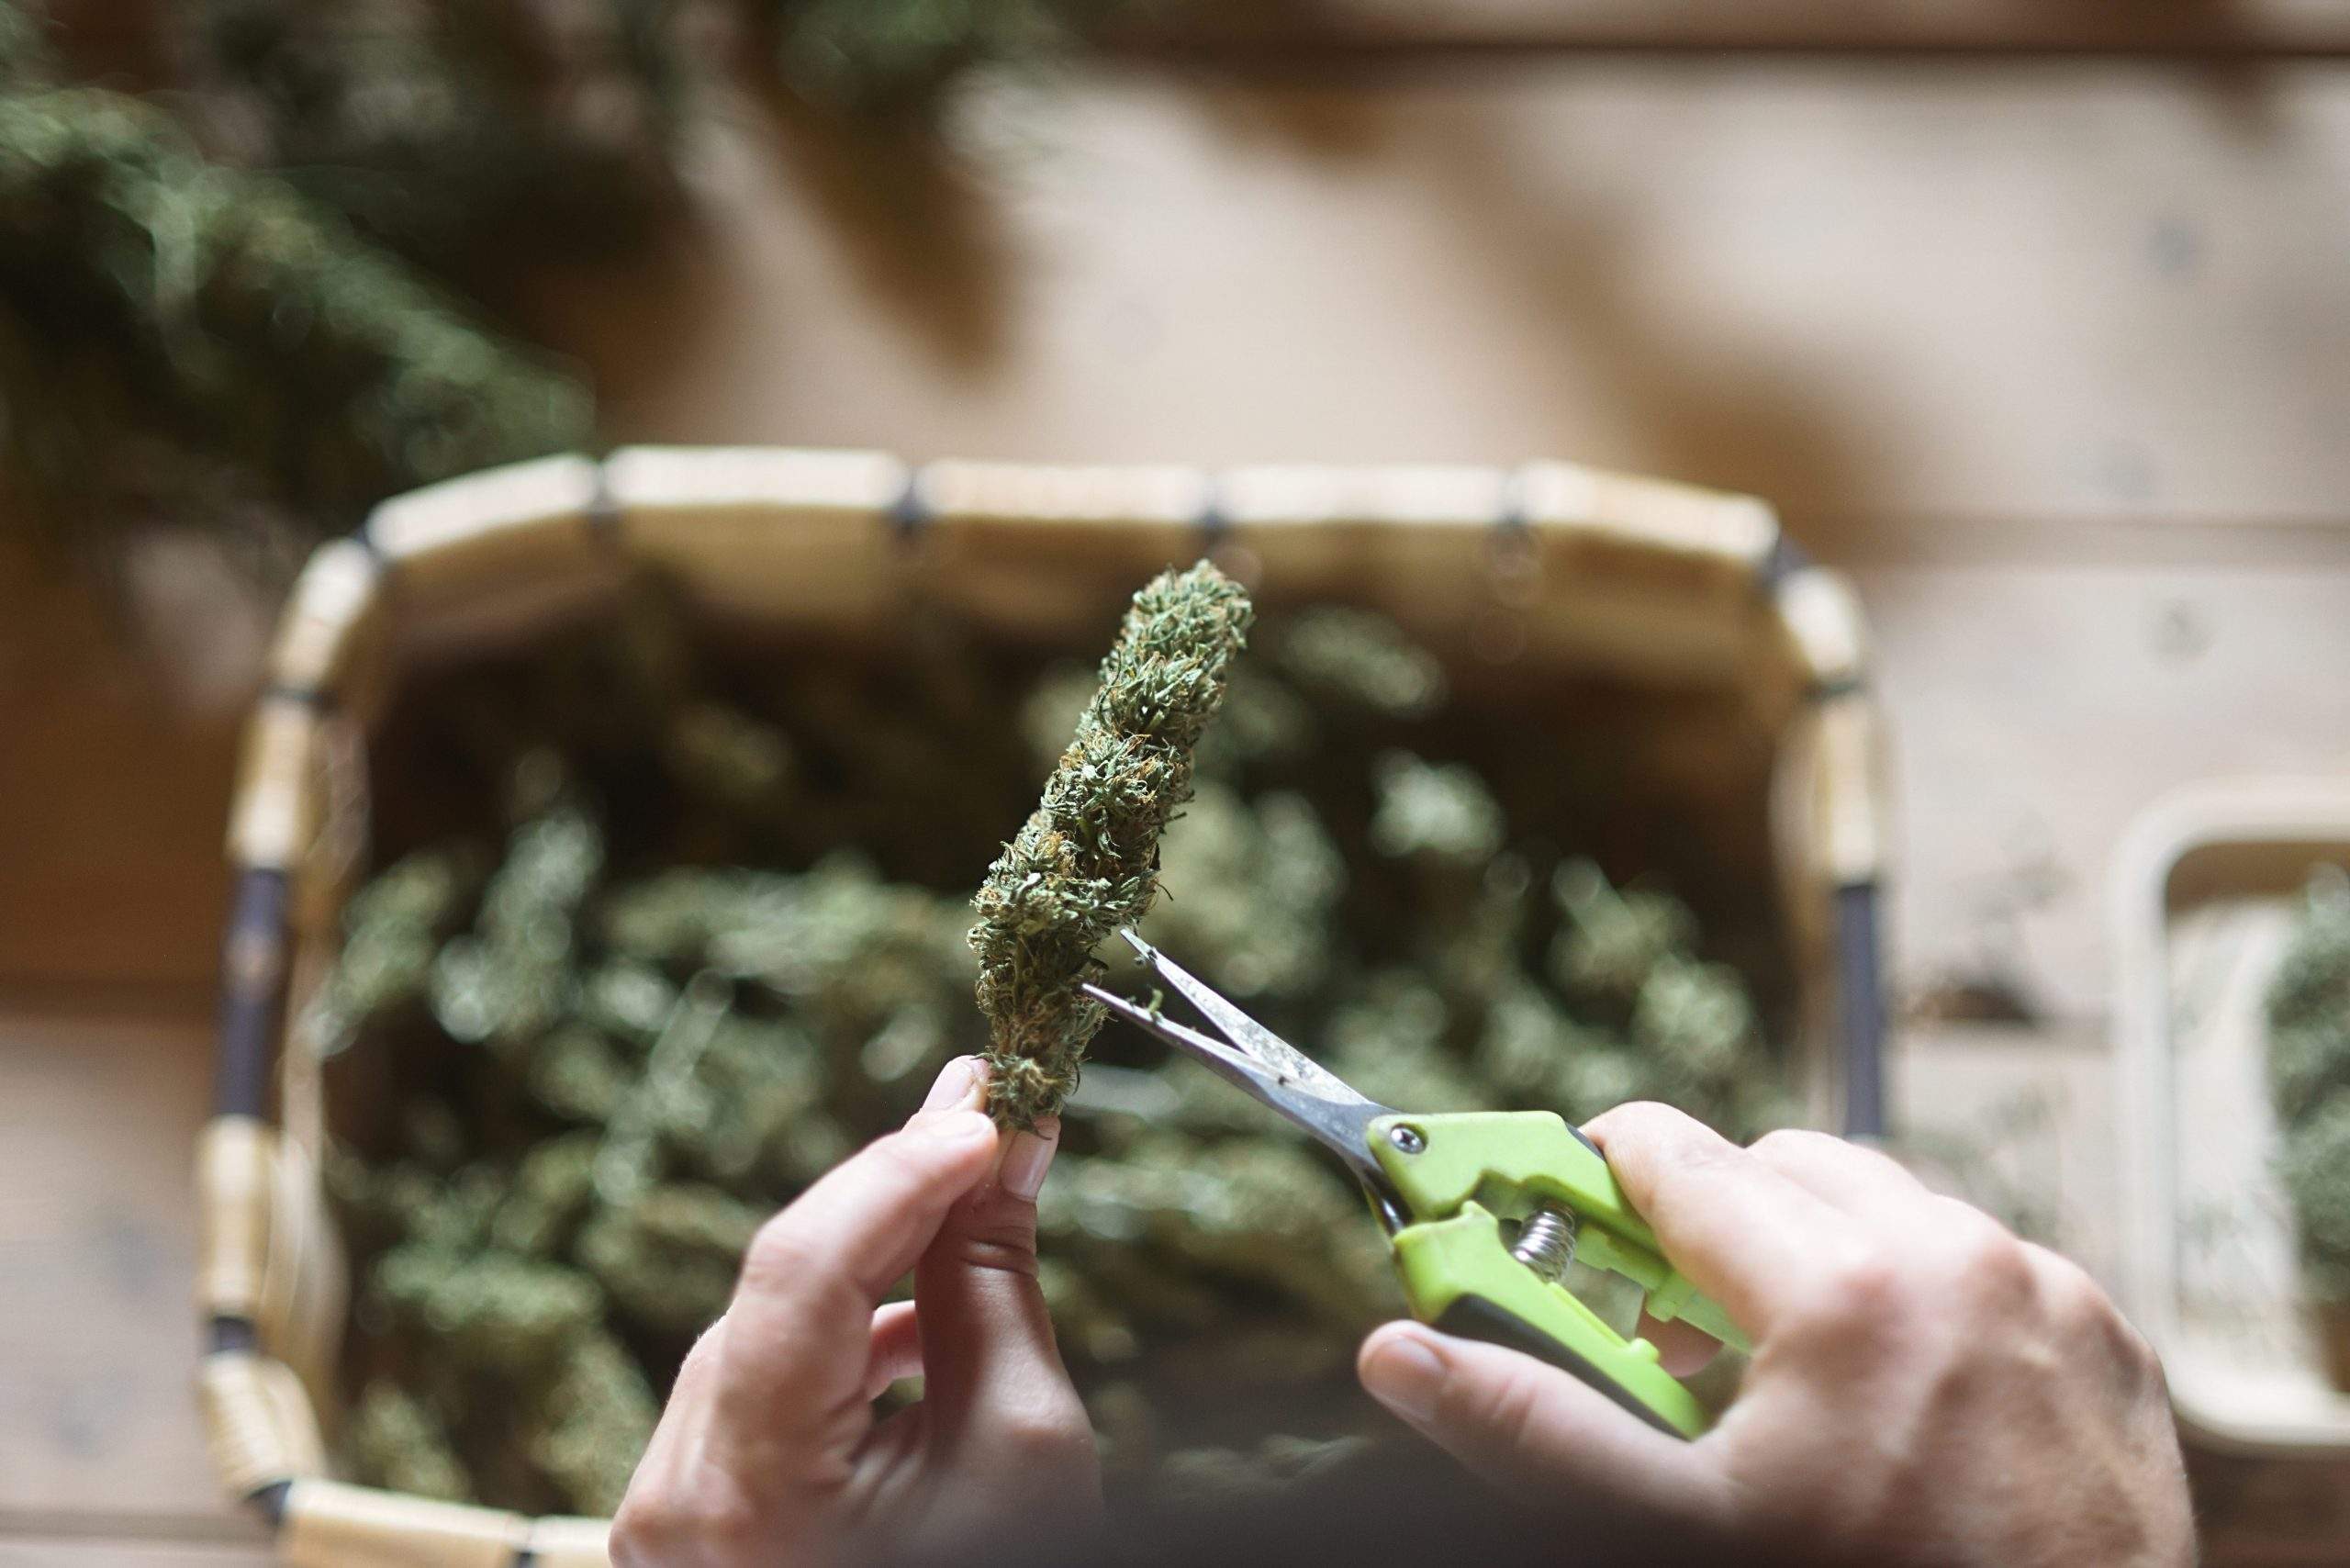 Tips for drying and curing cannabis